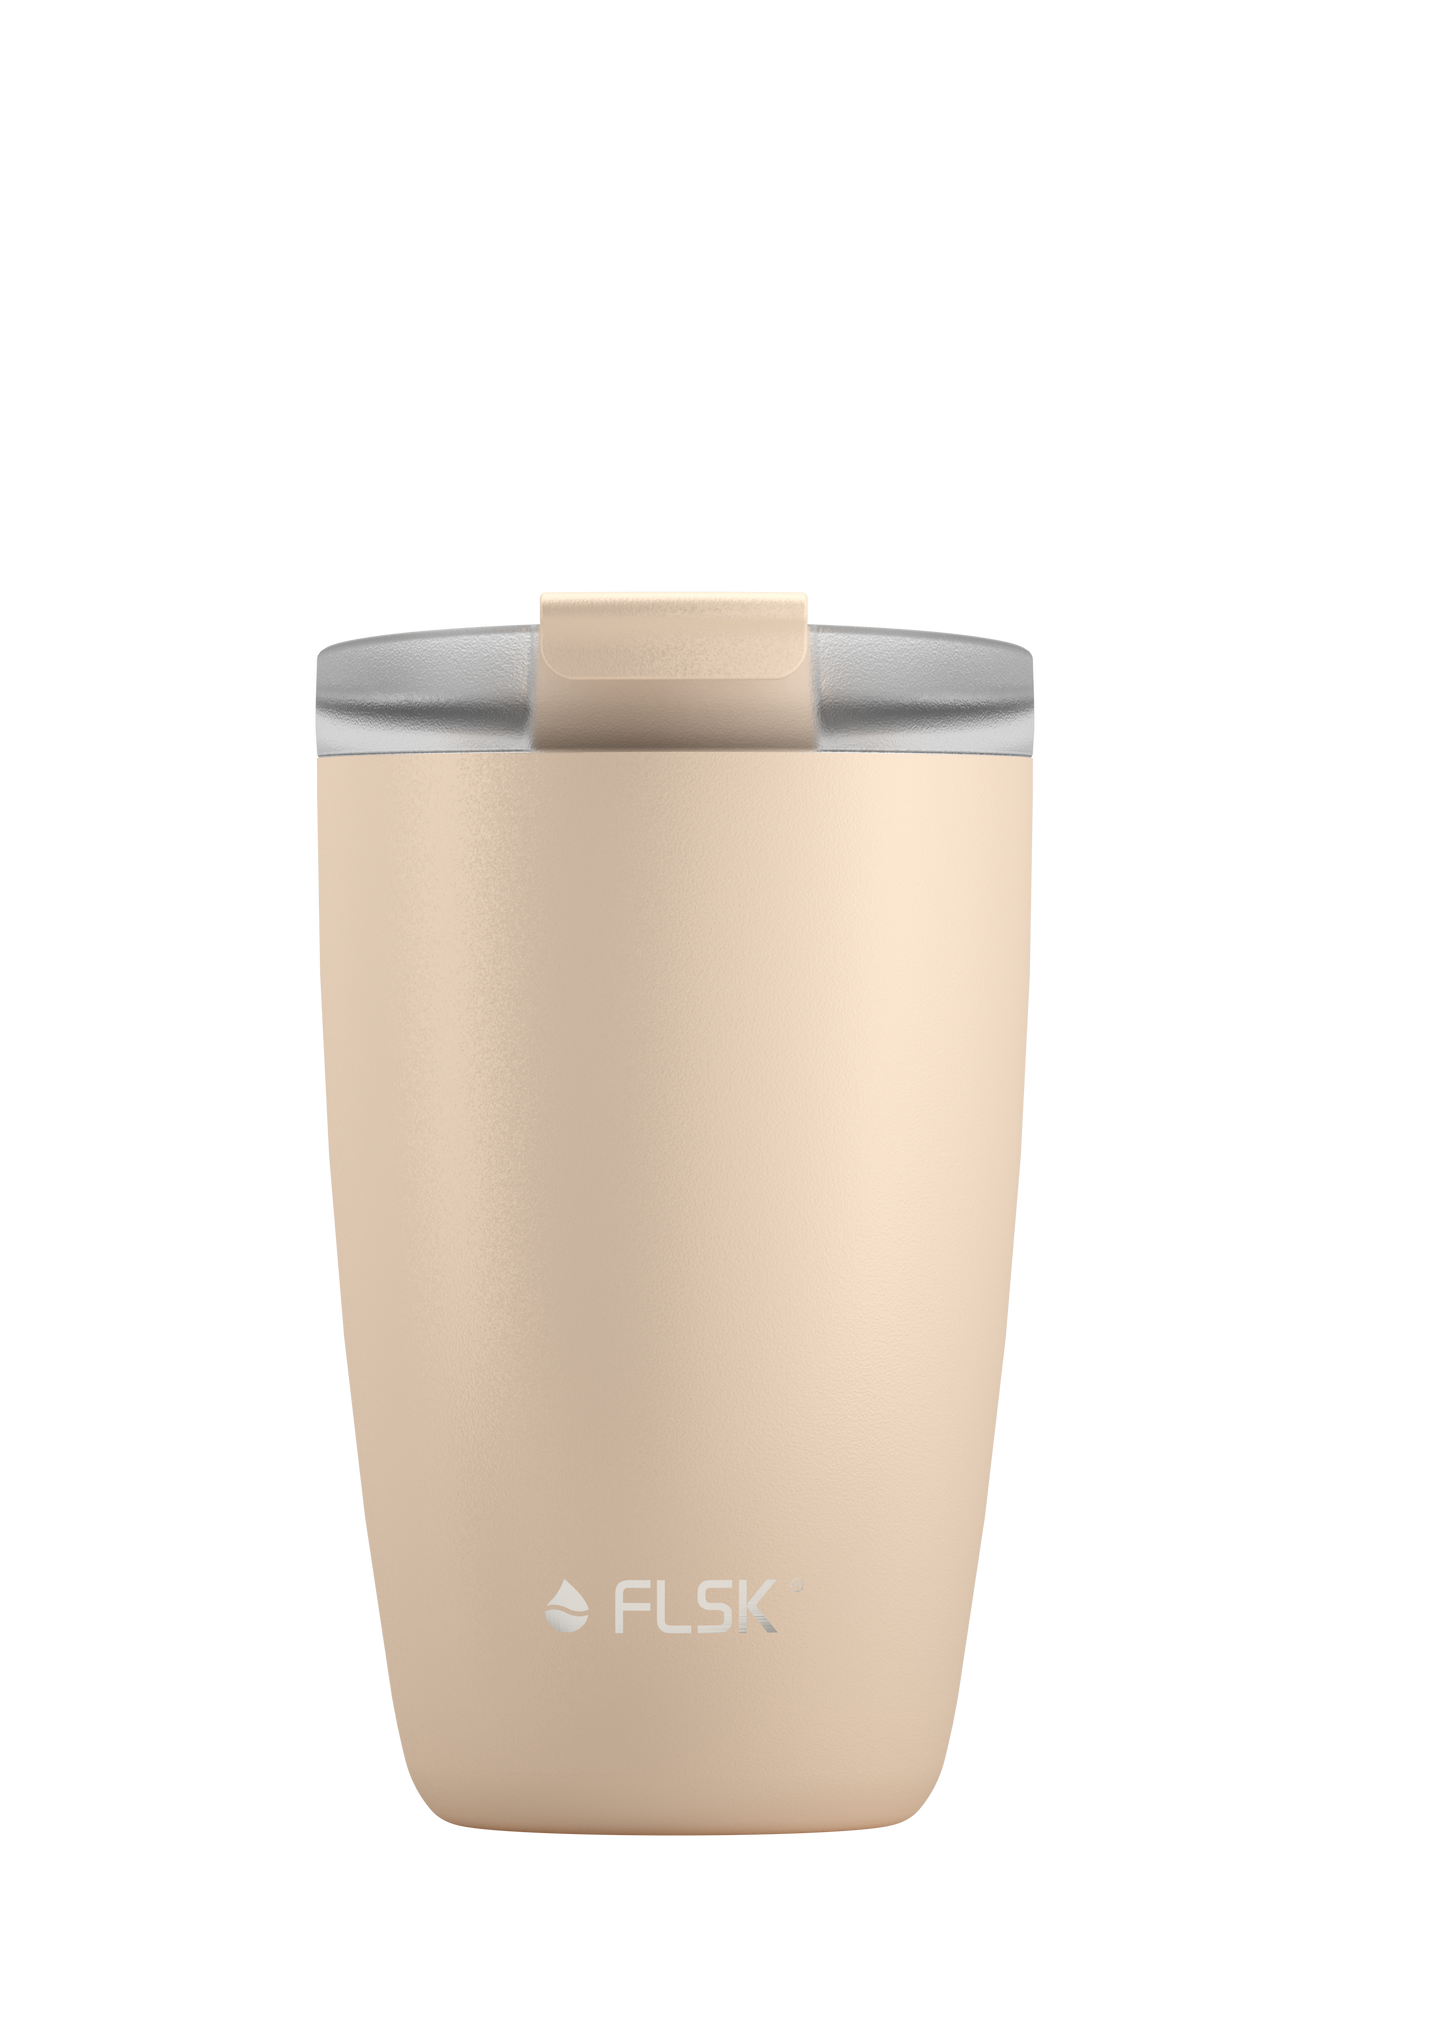 CUP coffee to go tumbler